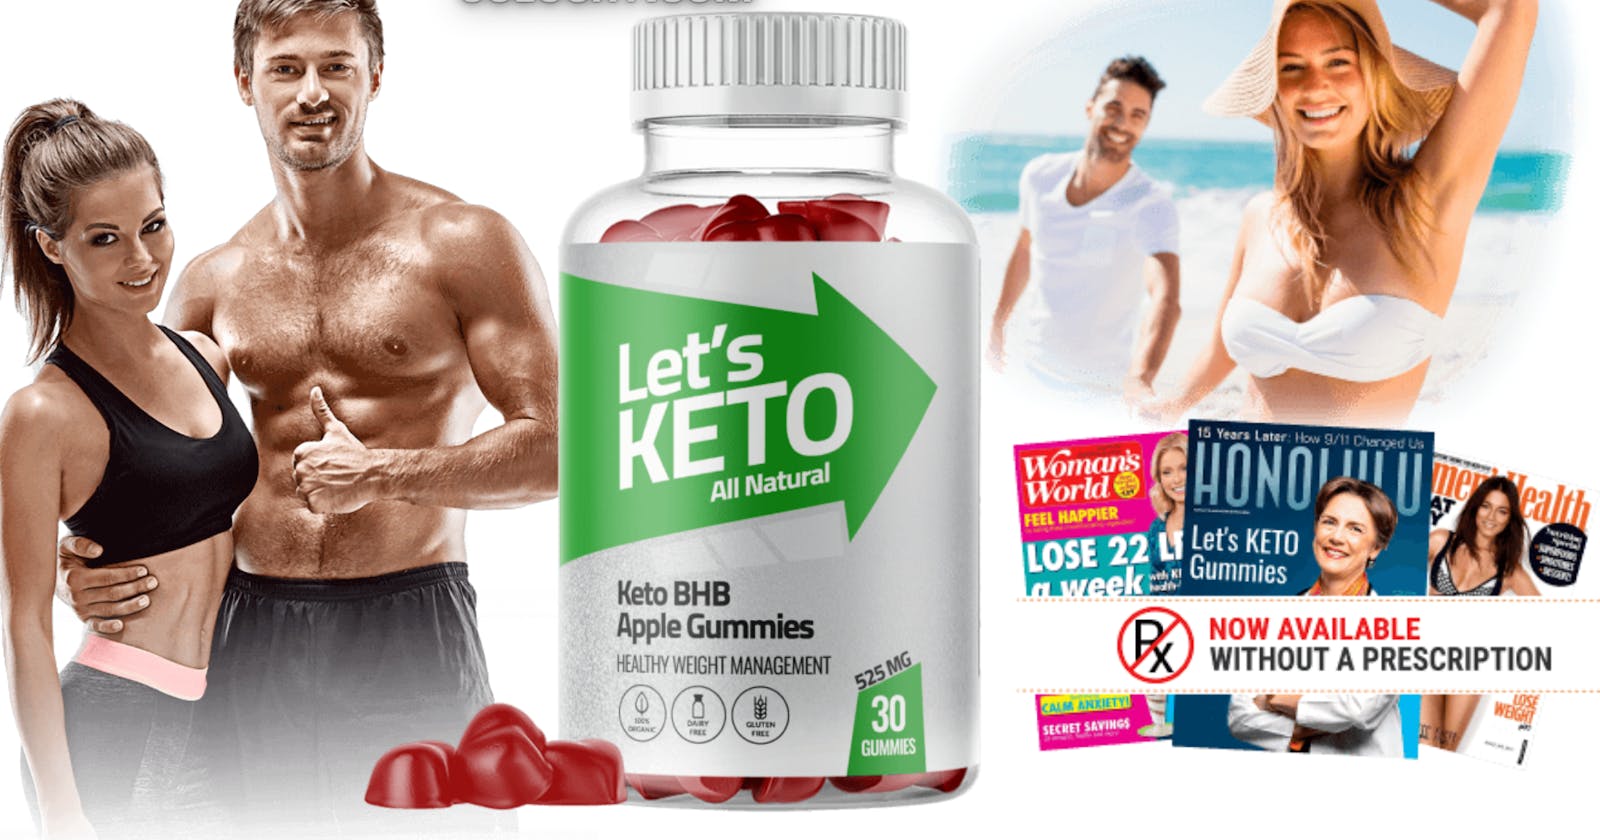 How to Use Let's Keto Gummies? The Lets Keto Gummies Control 1 Month